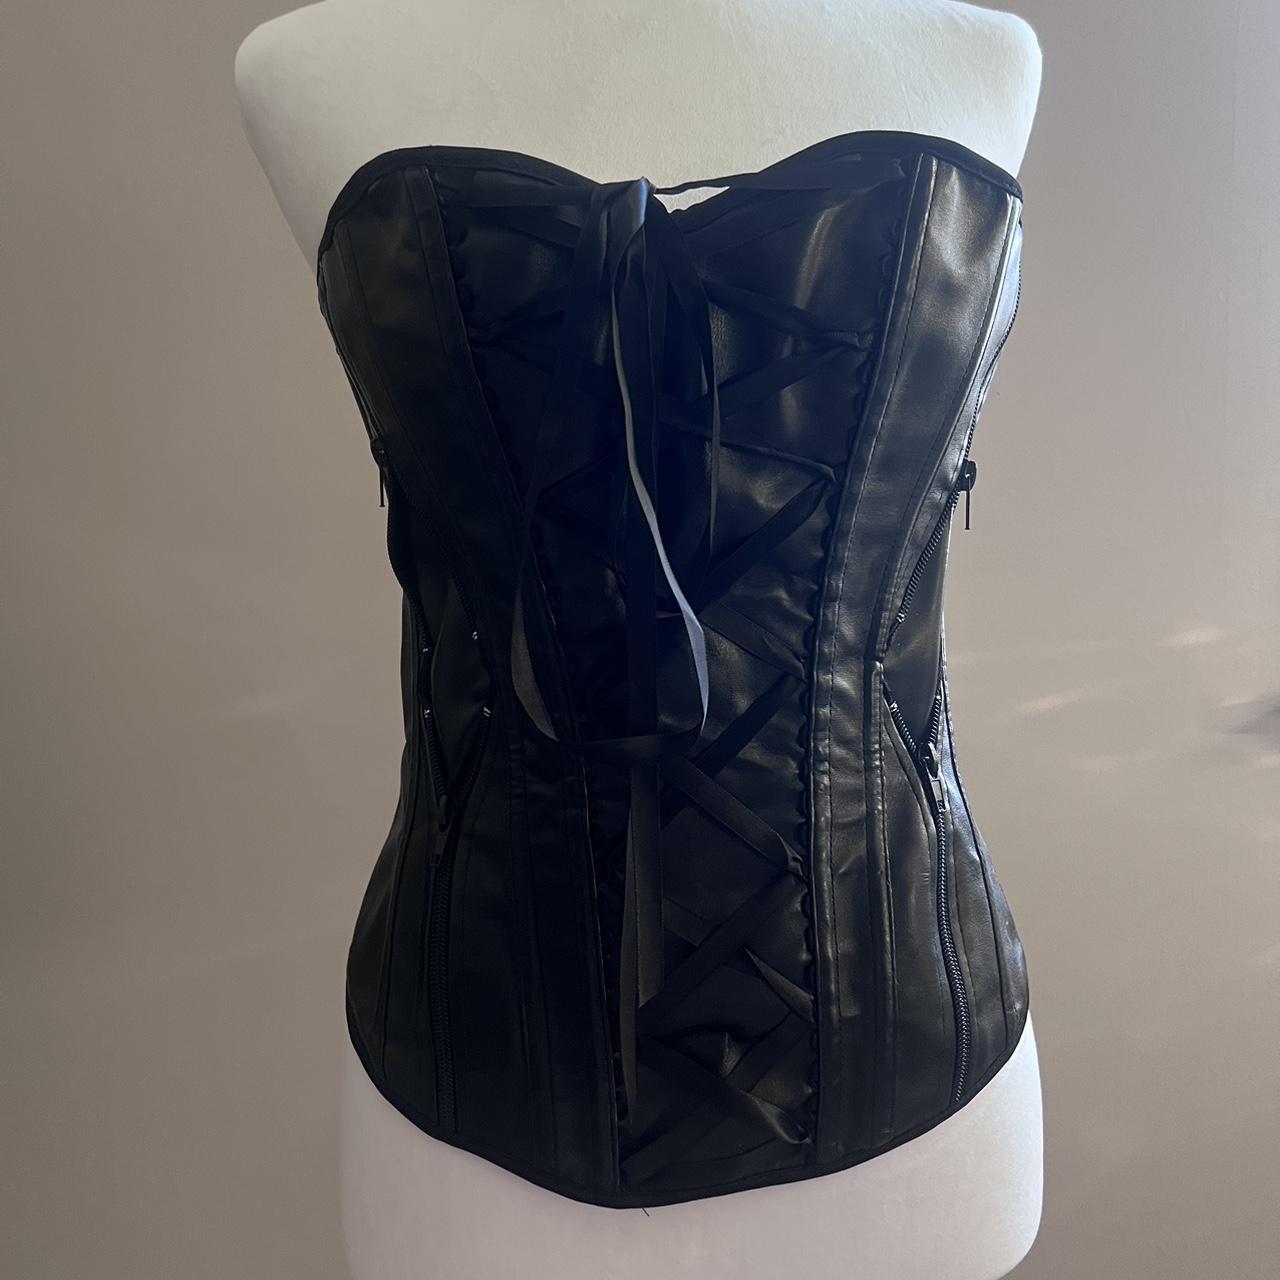 Vaacodor Corset from Corset Story Black faux - Depop